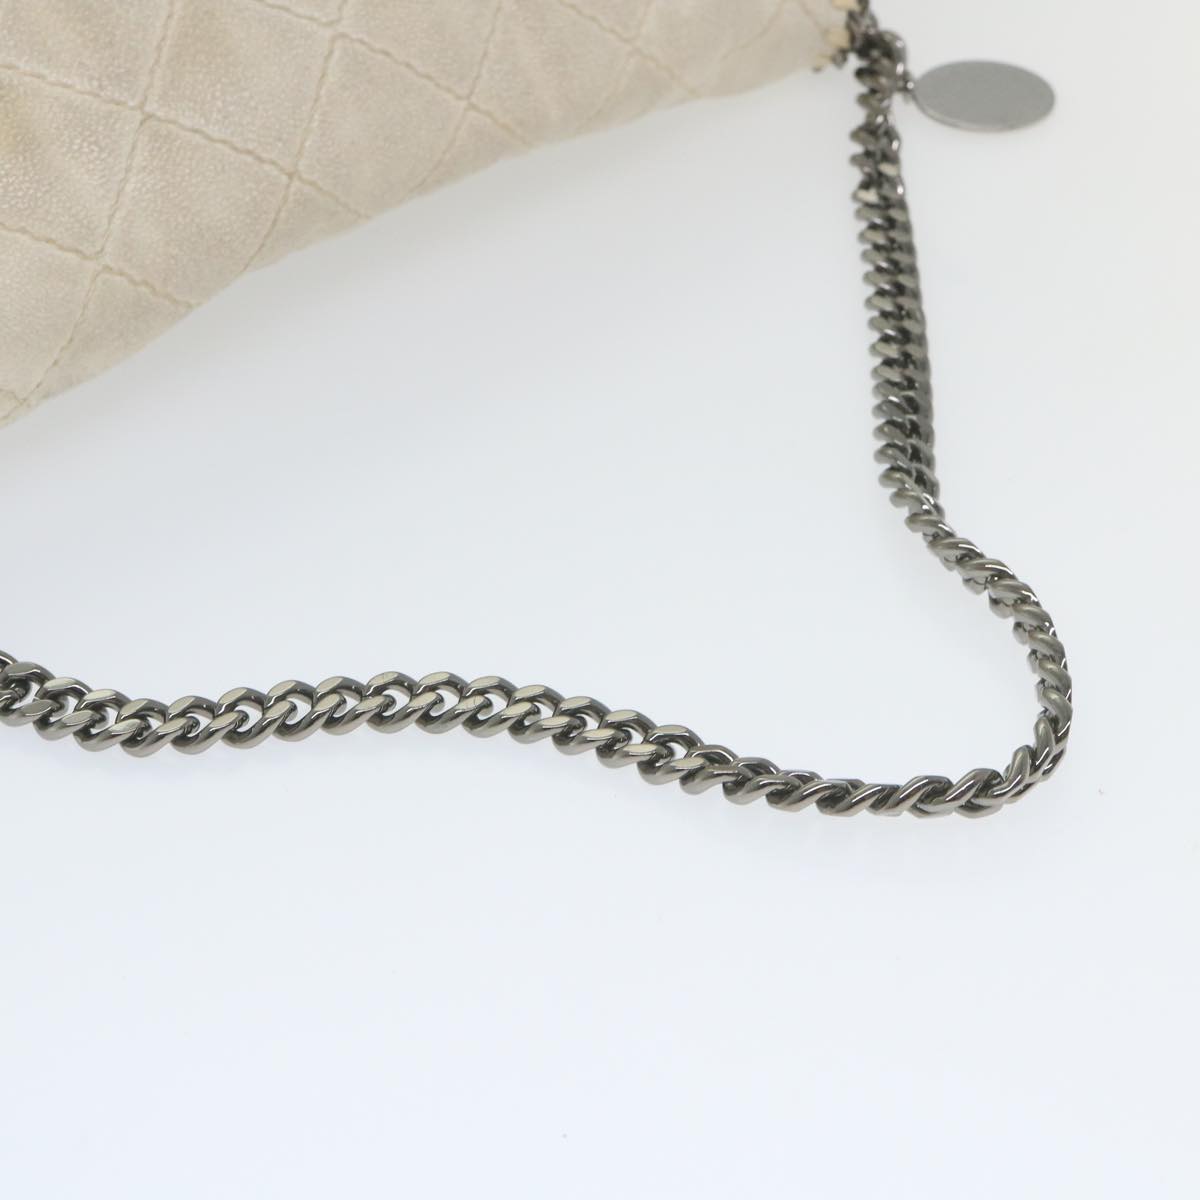 Stella MacCartney Chain Falabella Shoulder Bag Polyester White Auth bs10215